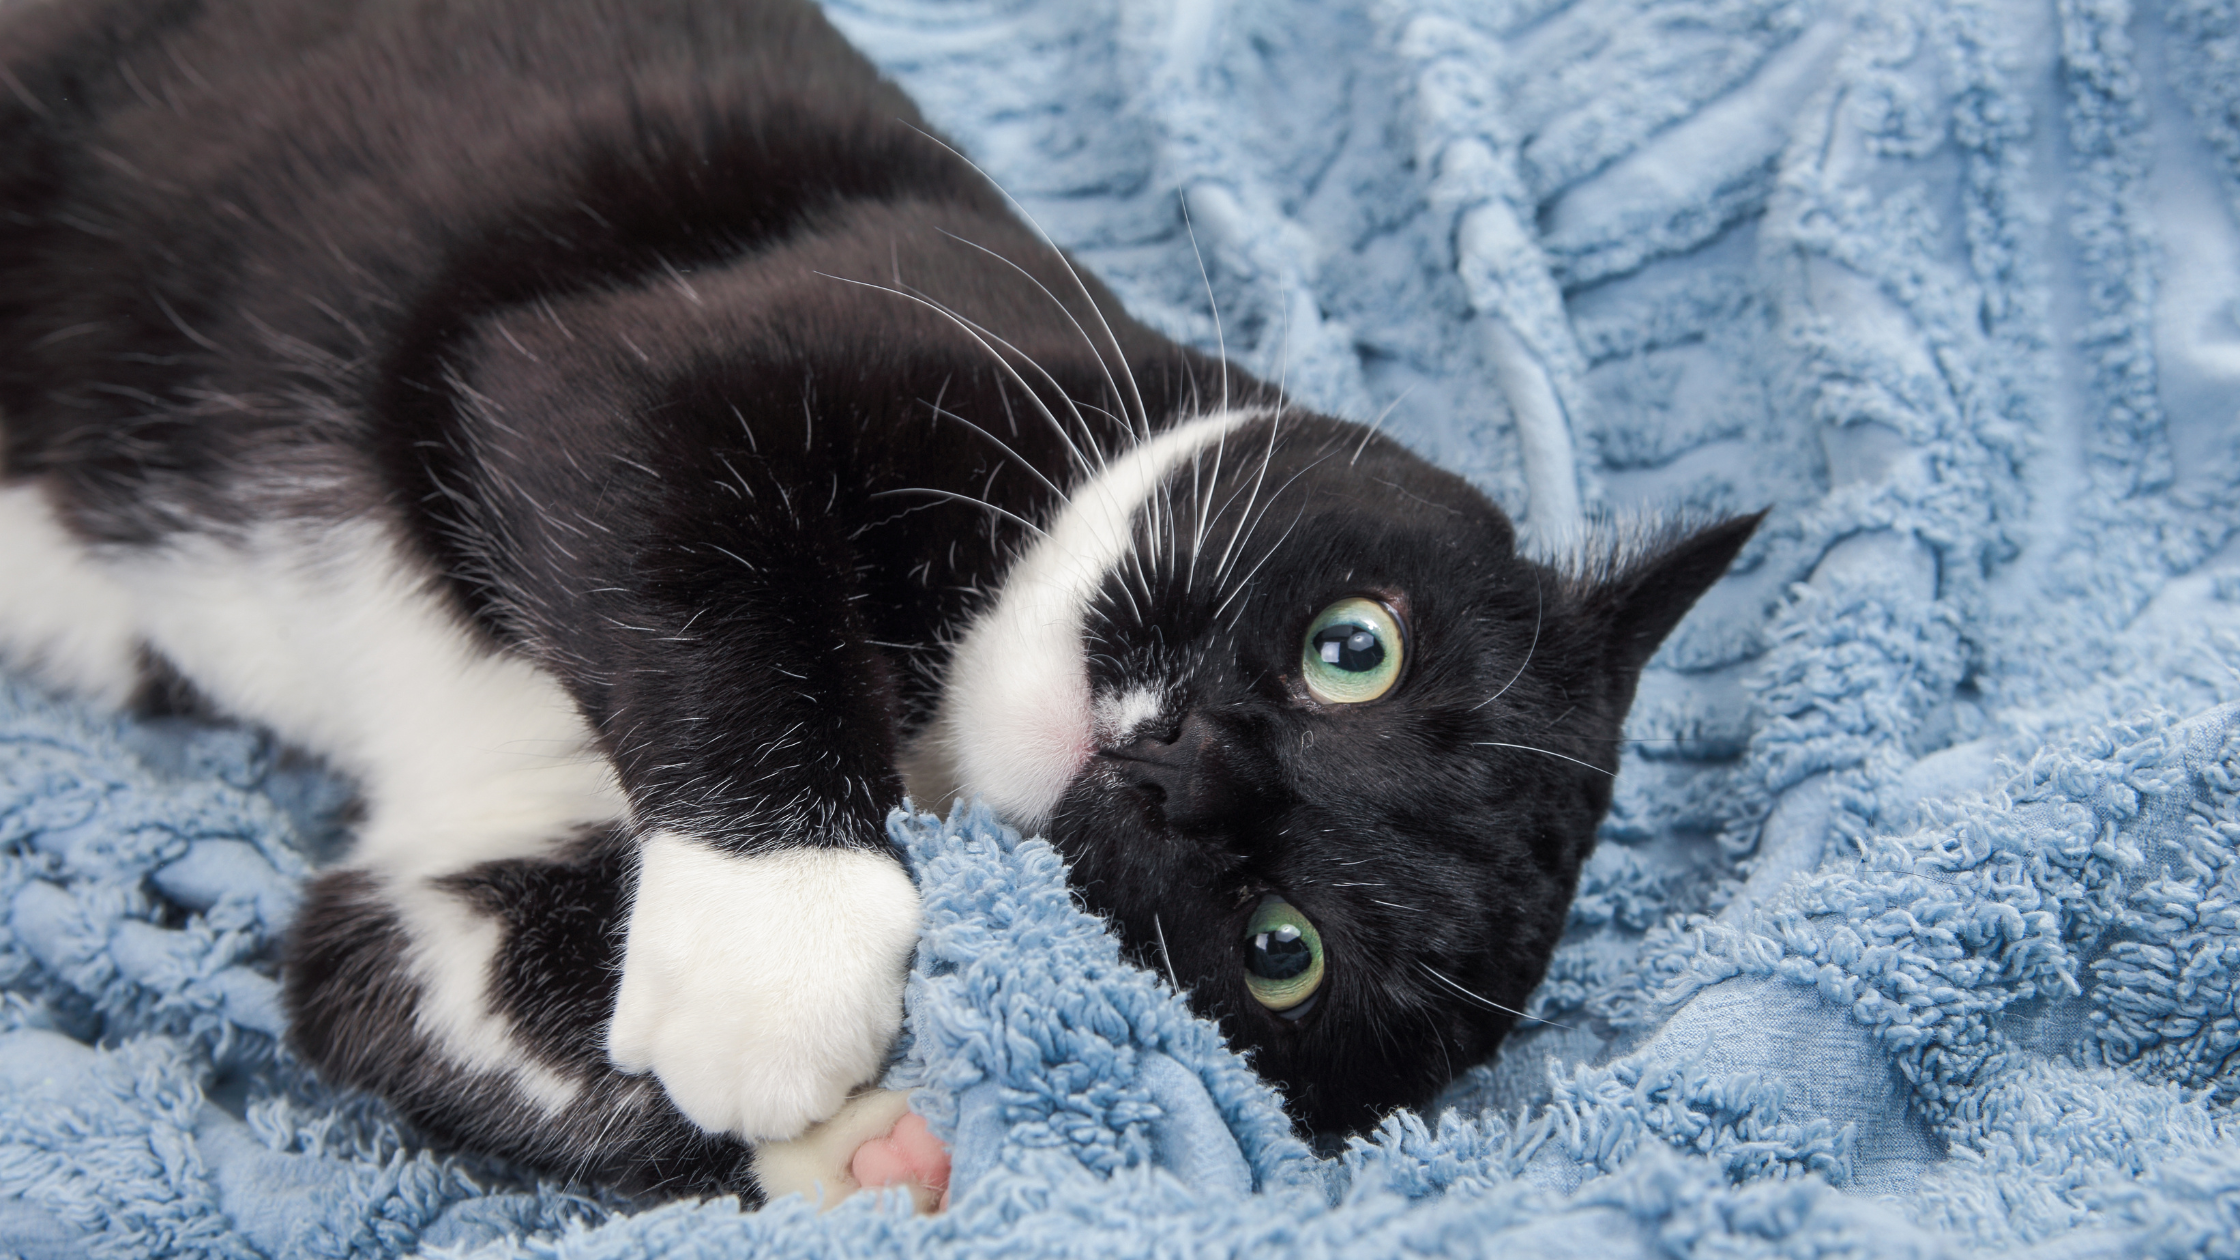 Caring for Your Tuxedo Cat